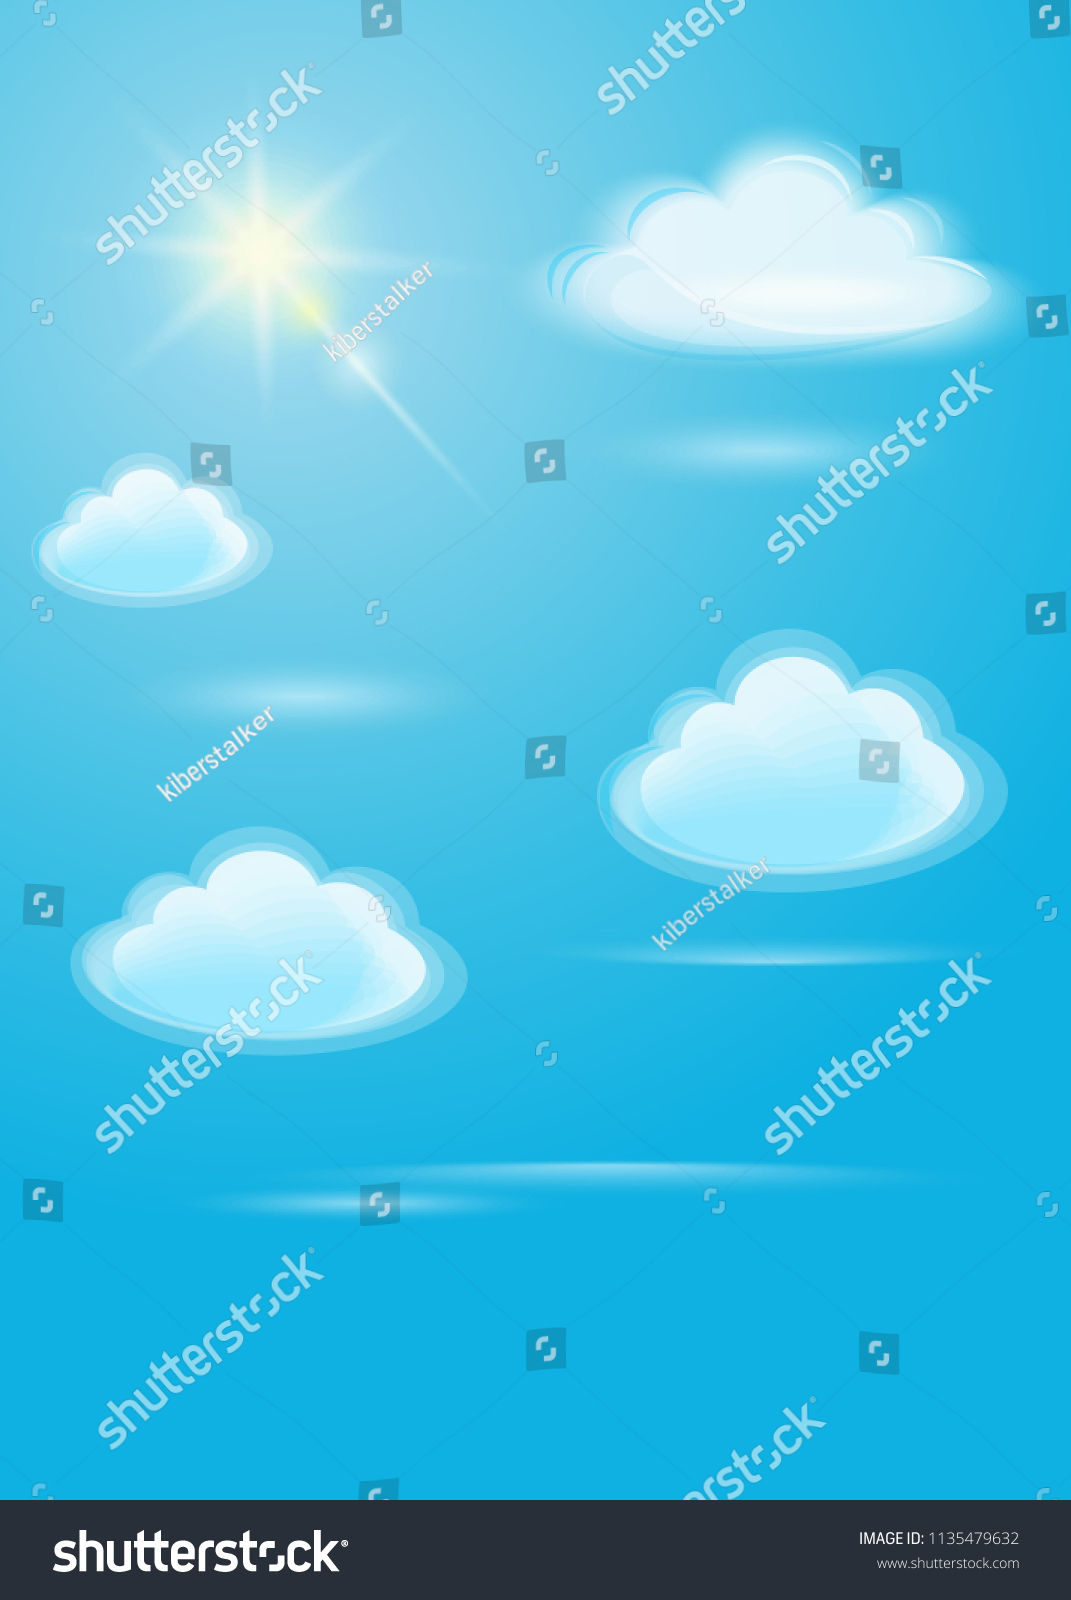 SVG of Translucent white clouds and bright sun on a blue sky background. Sunlight special lens flare light effect in clear blue sky. Vector illustration svg